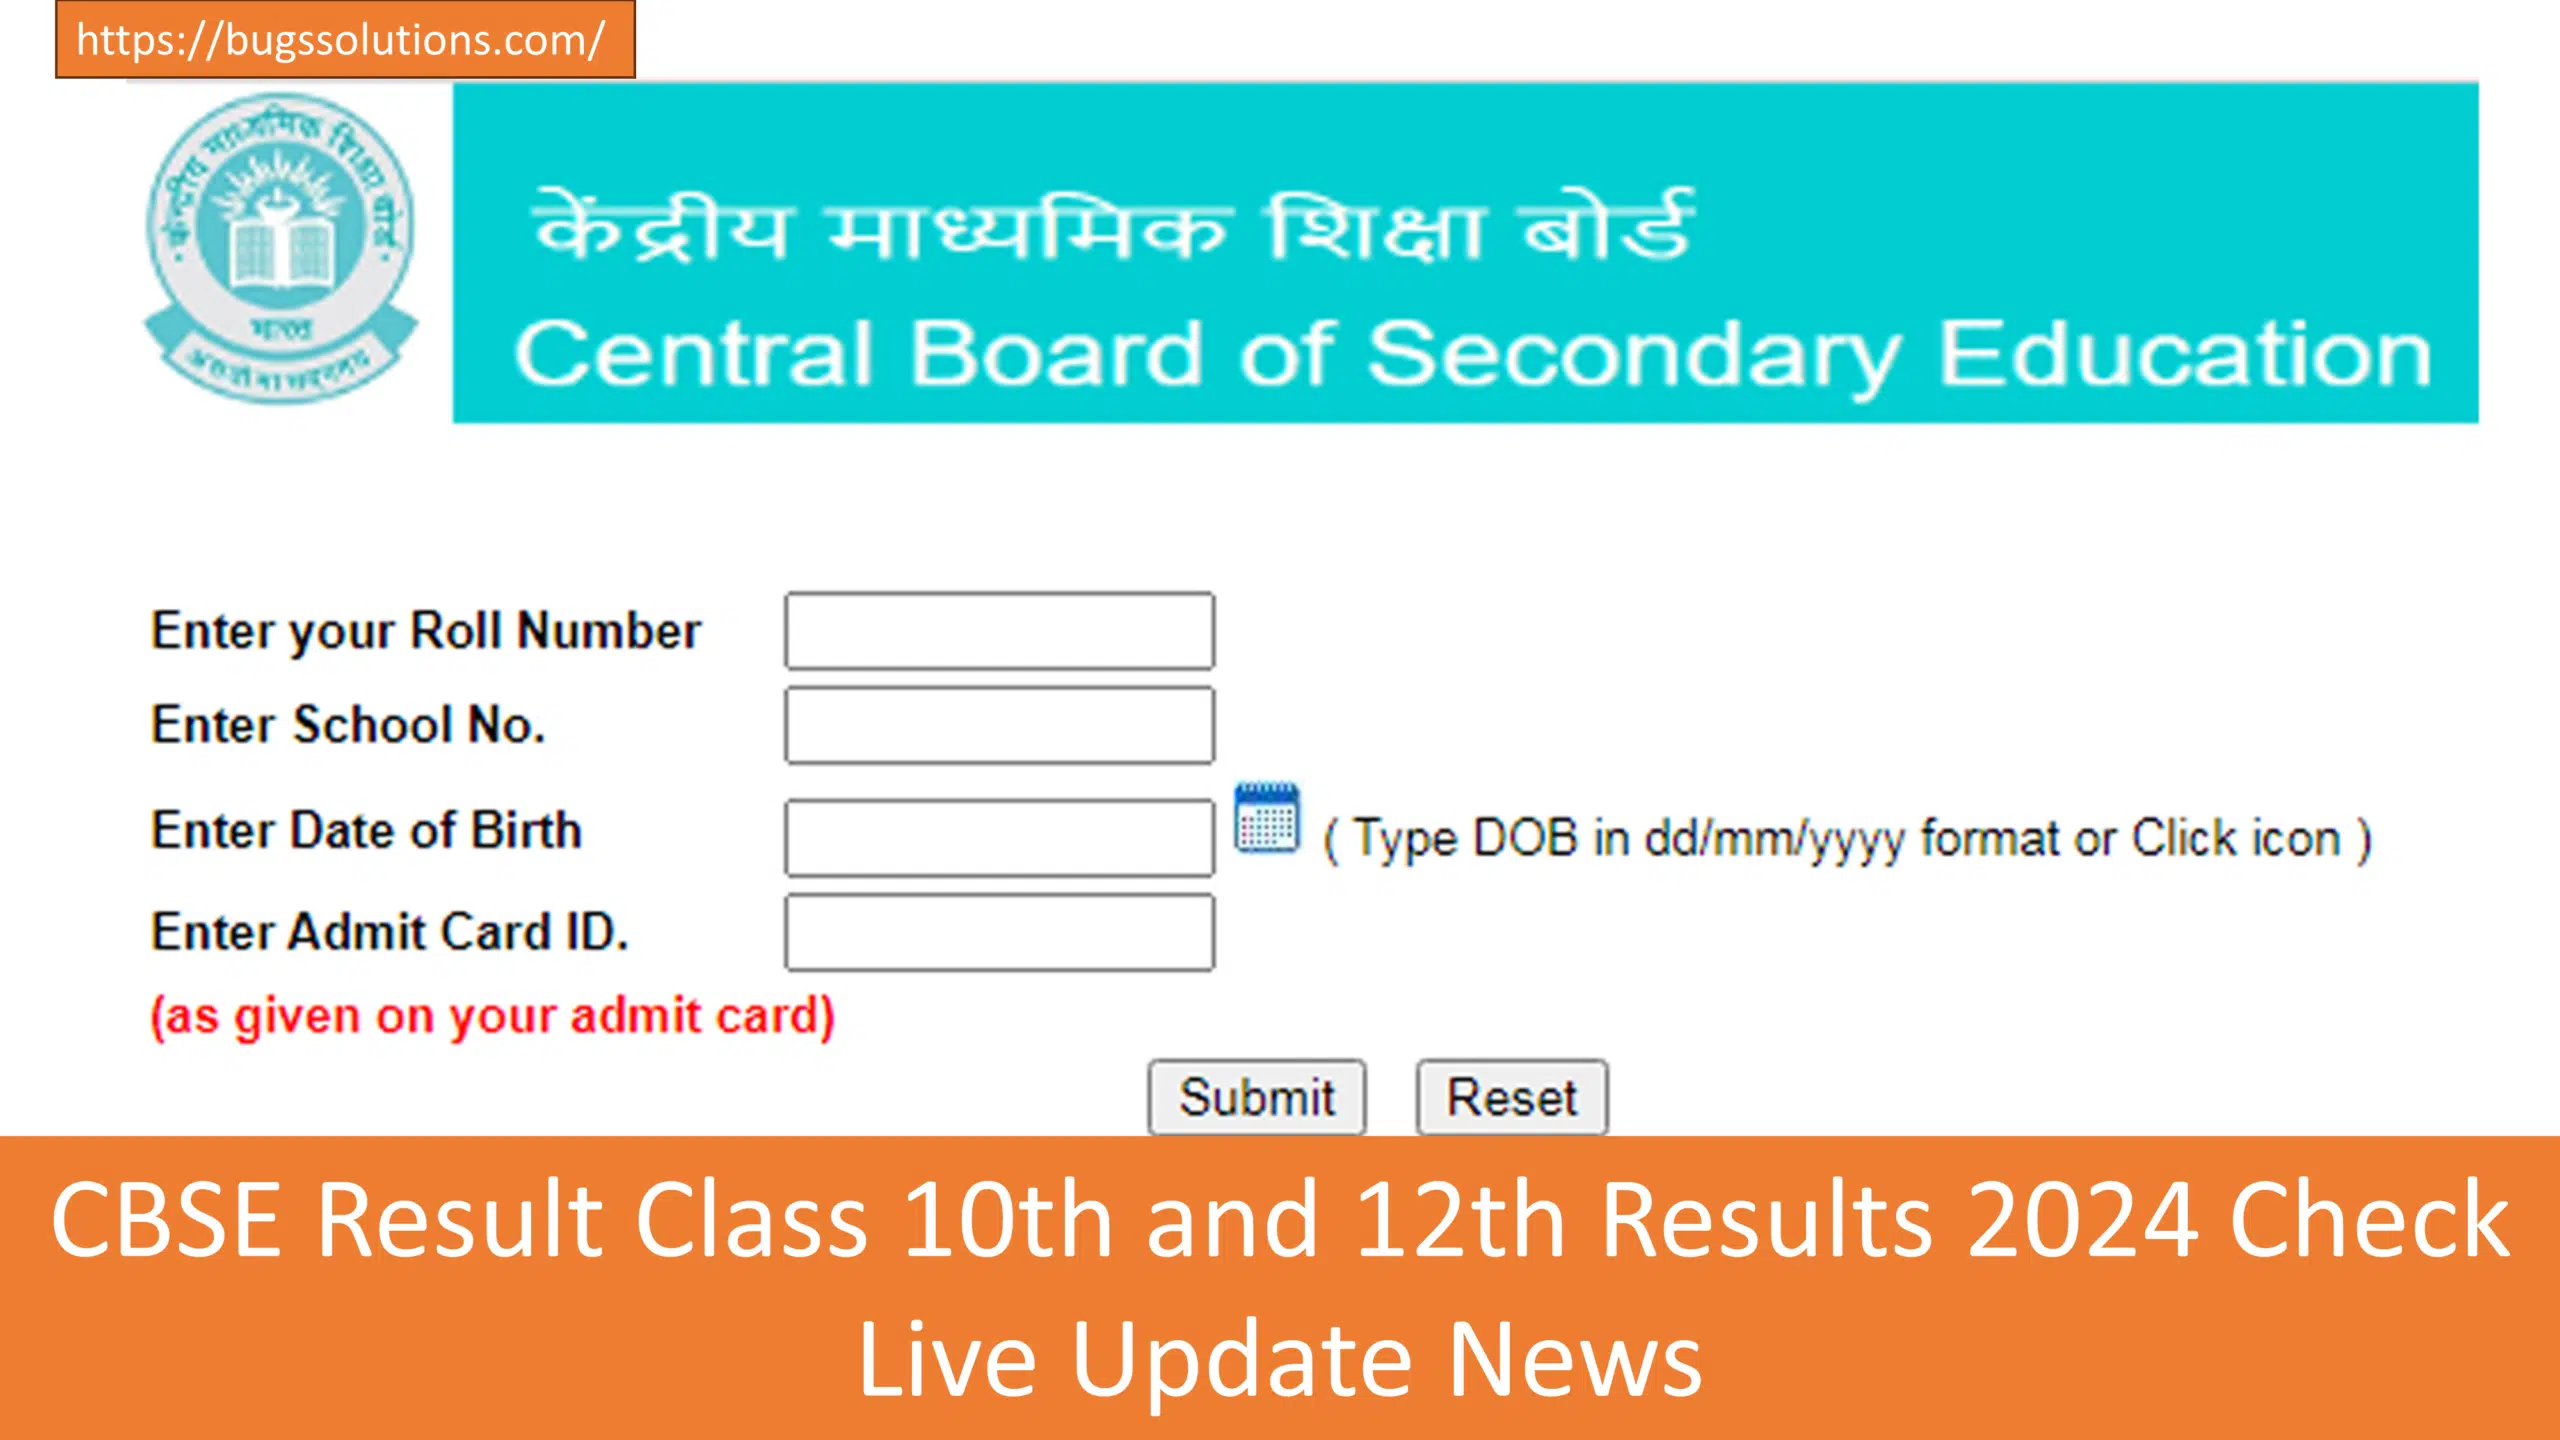 CBSE Result Class 10th and 12th Results 2024 Check Live Update News